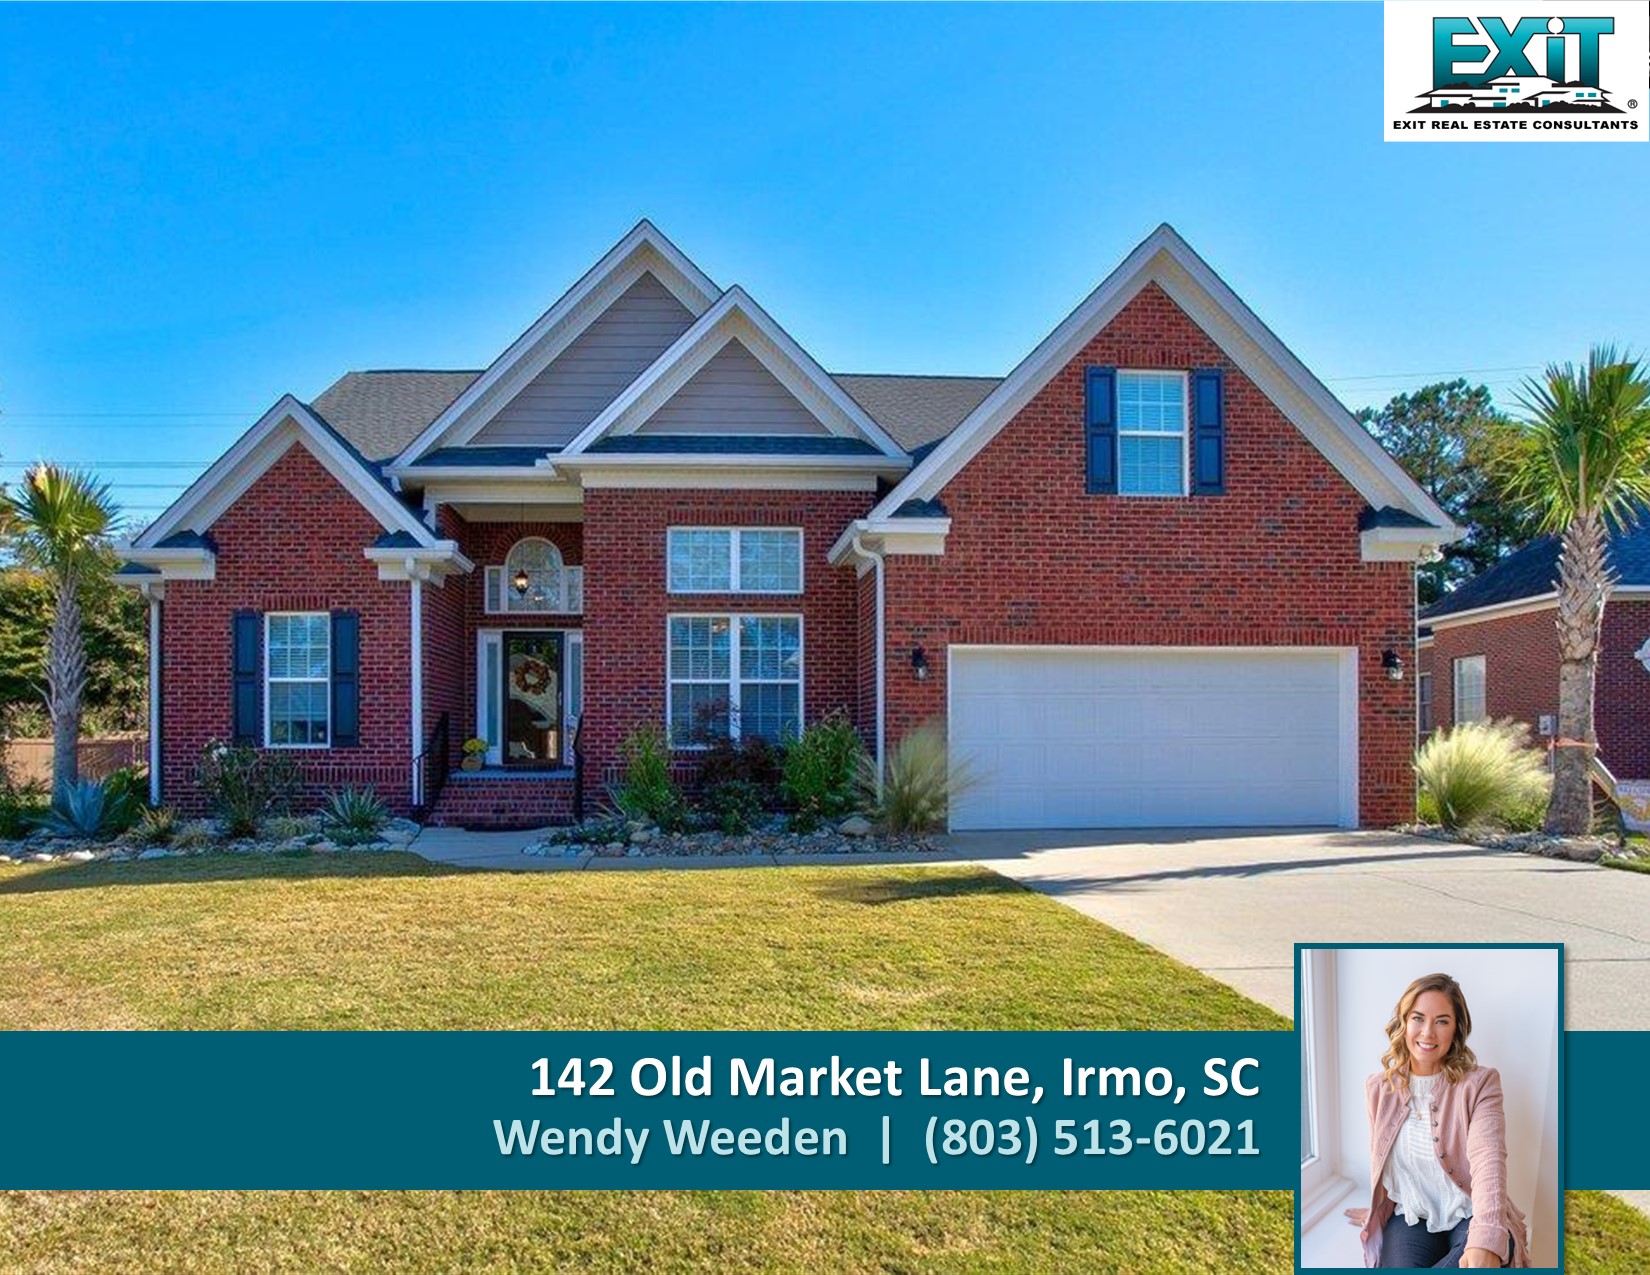 Just listed in Wyndhurst - Irmo